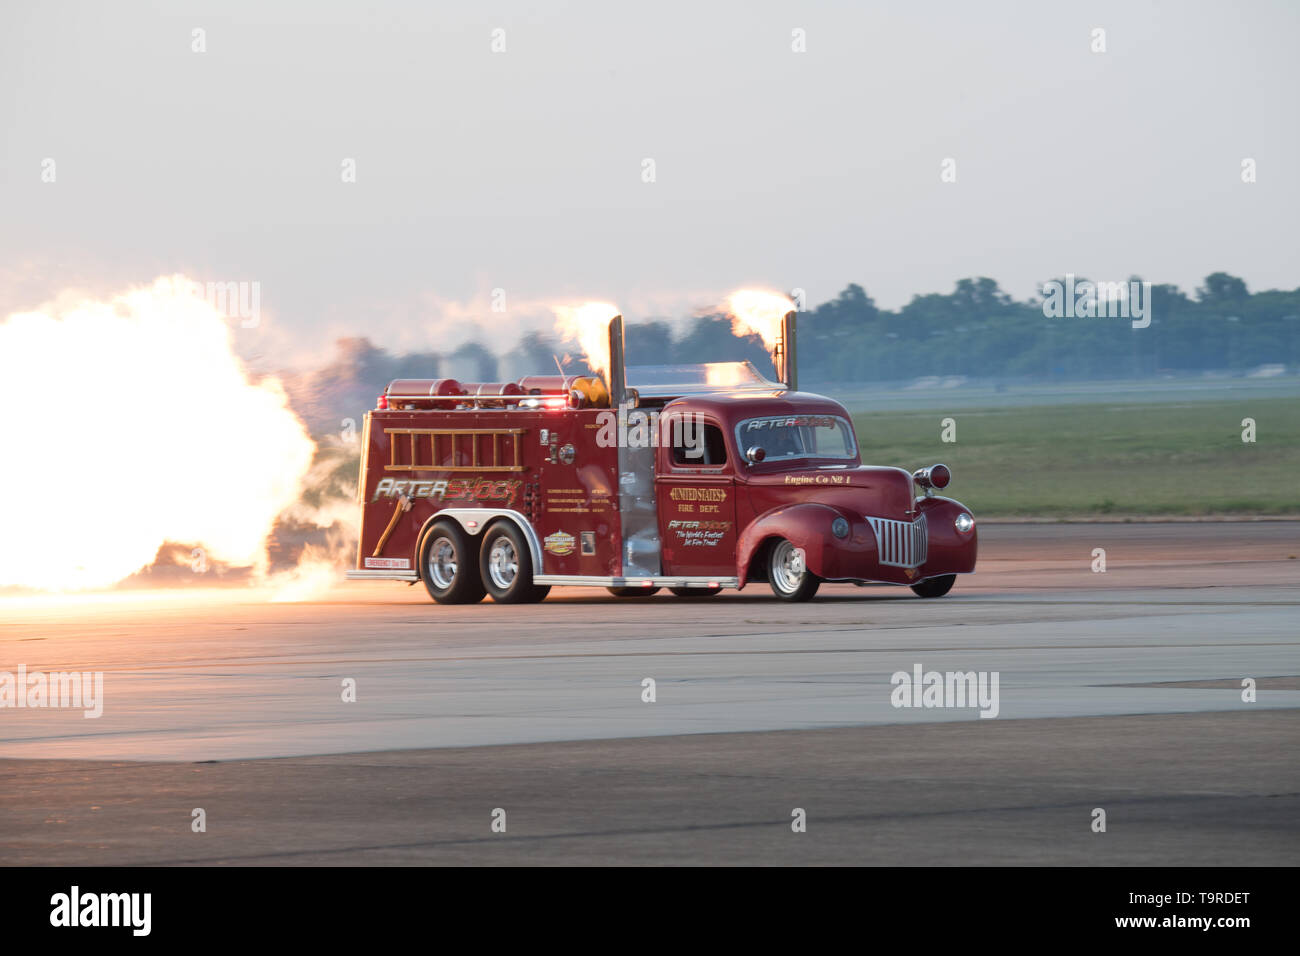 An Aftershock truck performs on the flight line during the Twilight Show before the Defenders of Liberty Air & Space Show at Barksdale Air Force Base, La., May 17, 2019. The airshow was first held in 1933 and is a full weekend of military and civilian aircraft and performances and displays. (U.S. Air Force photo by Airman 1st Class Lillian Miller) Stock Photo